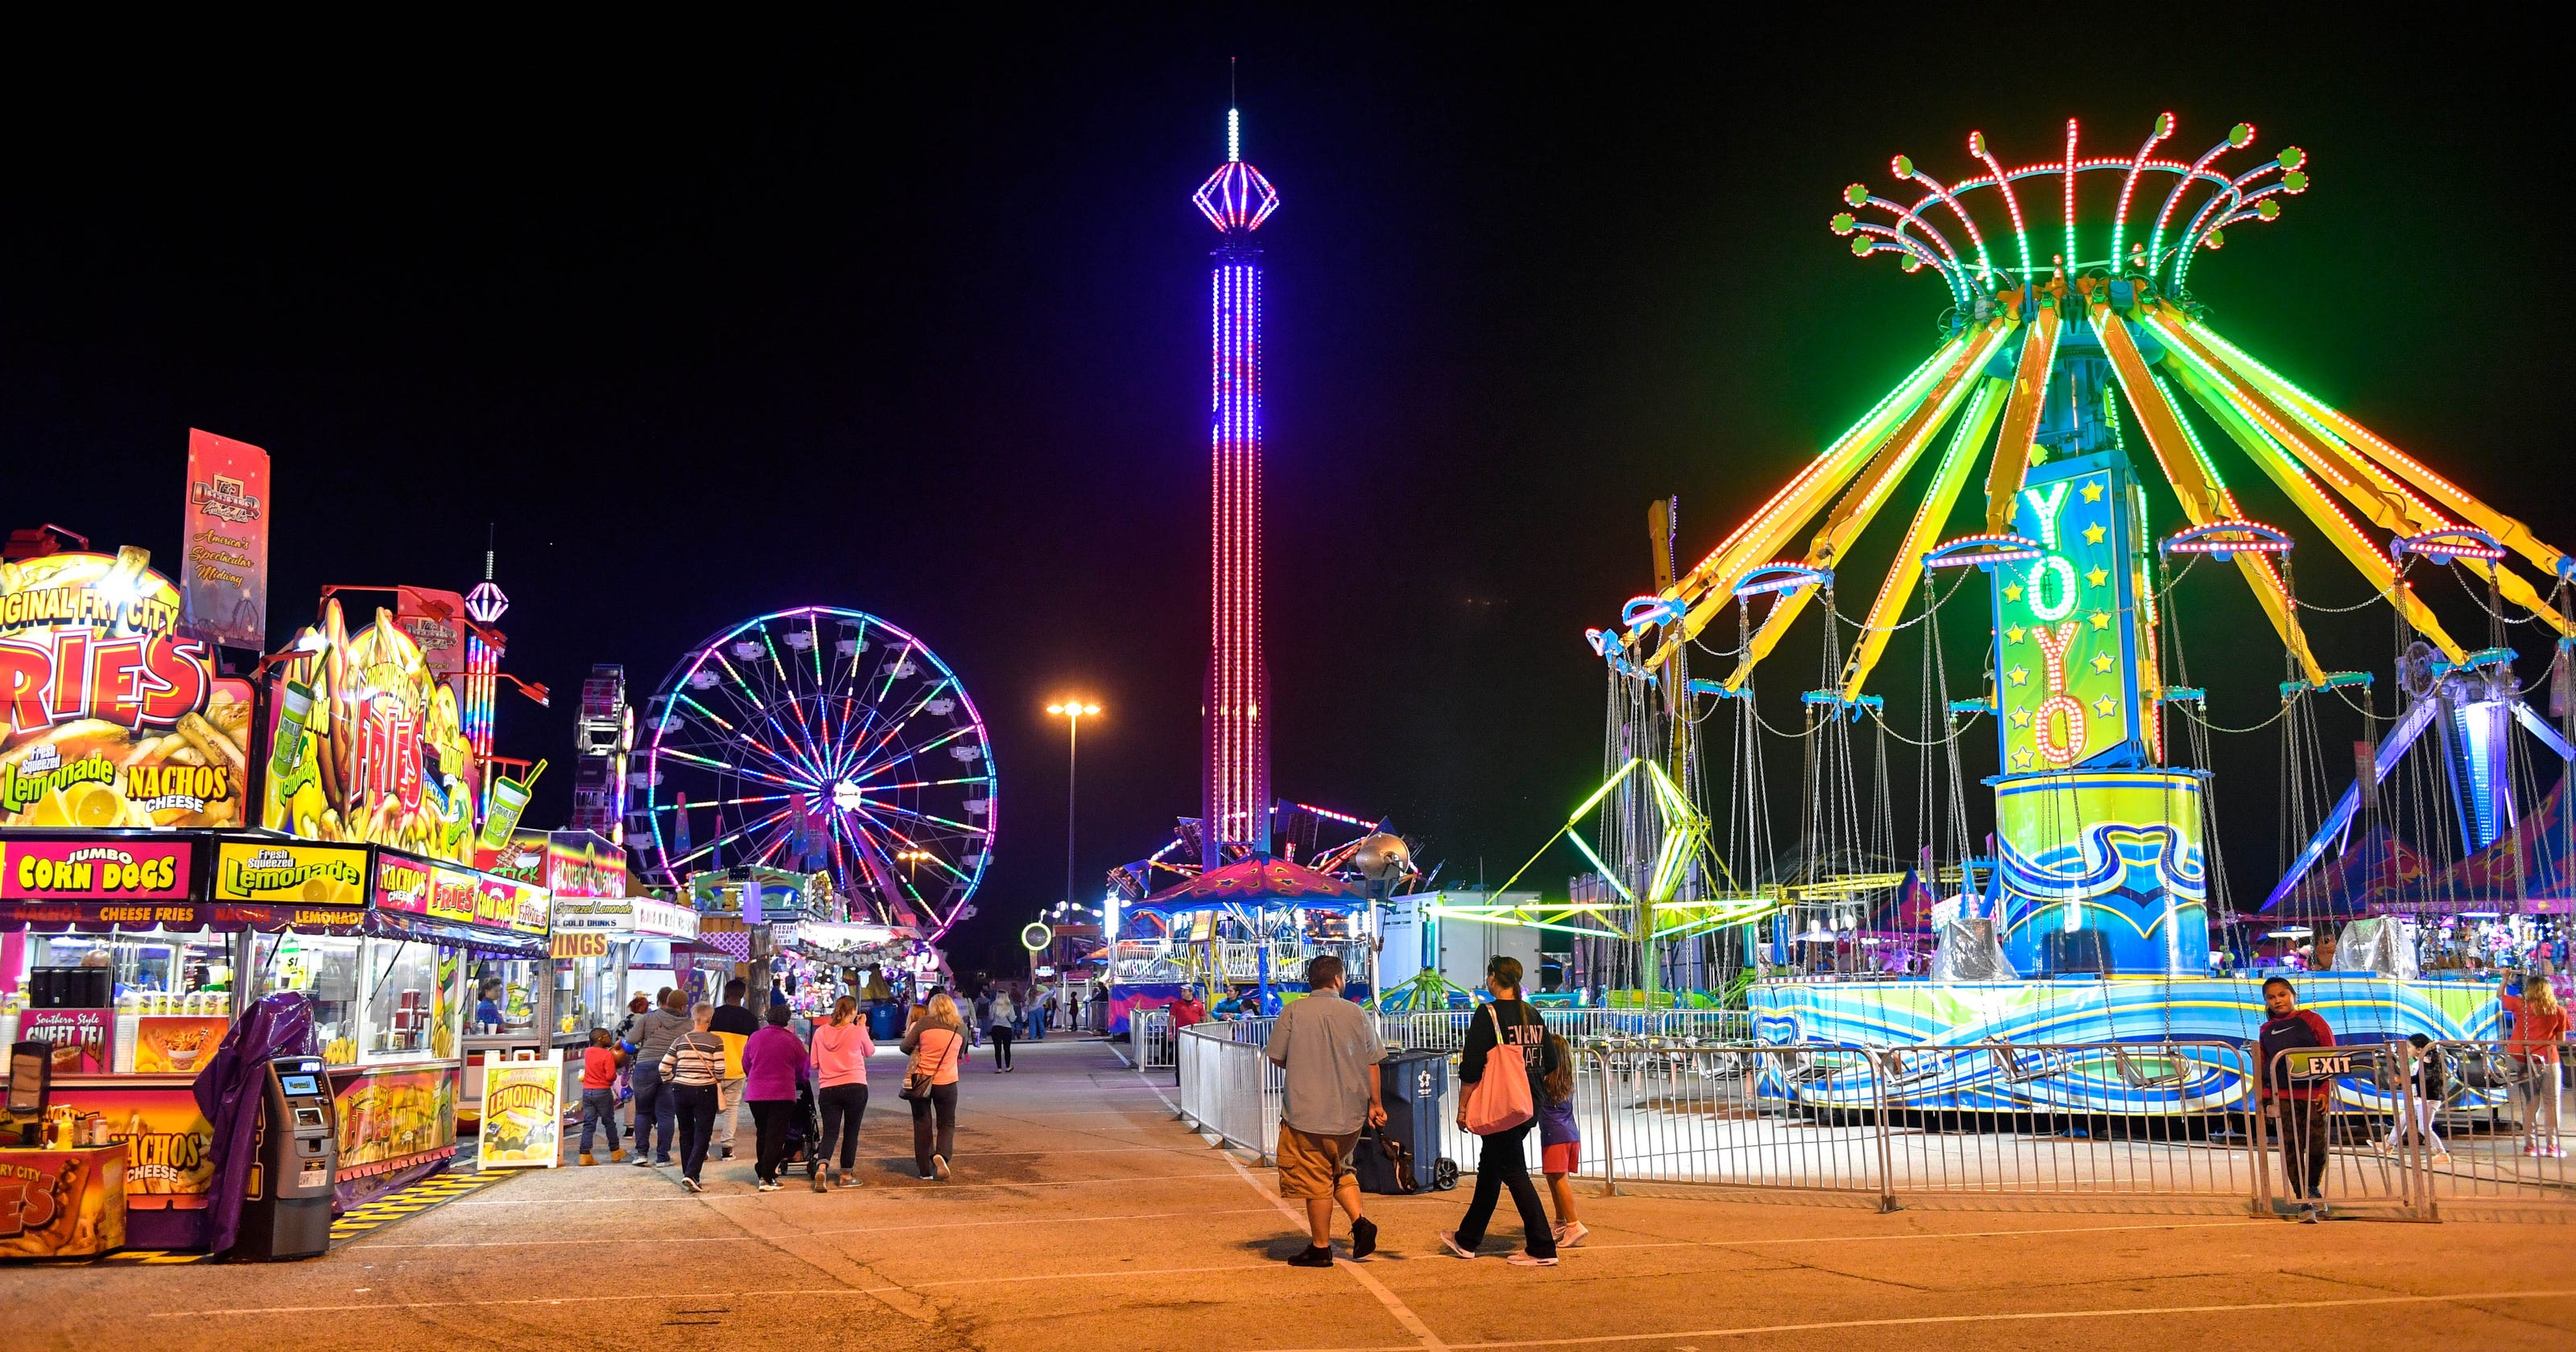 The York Fair will move to July starting in 2020